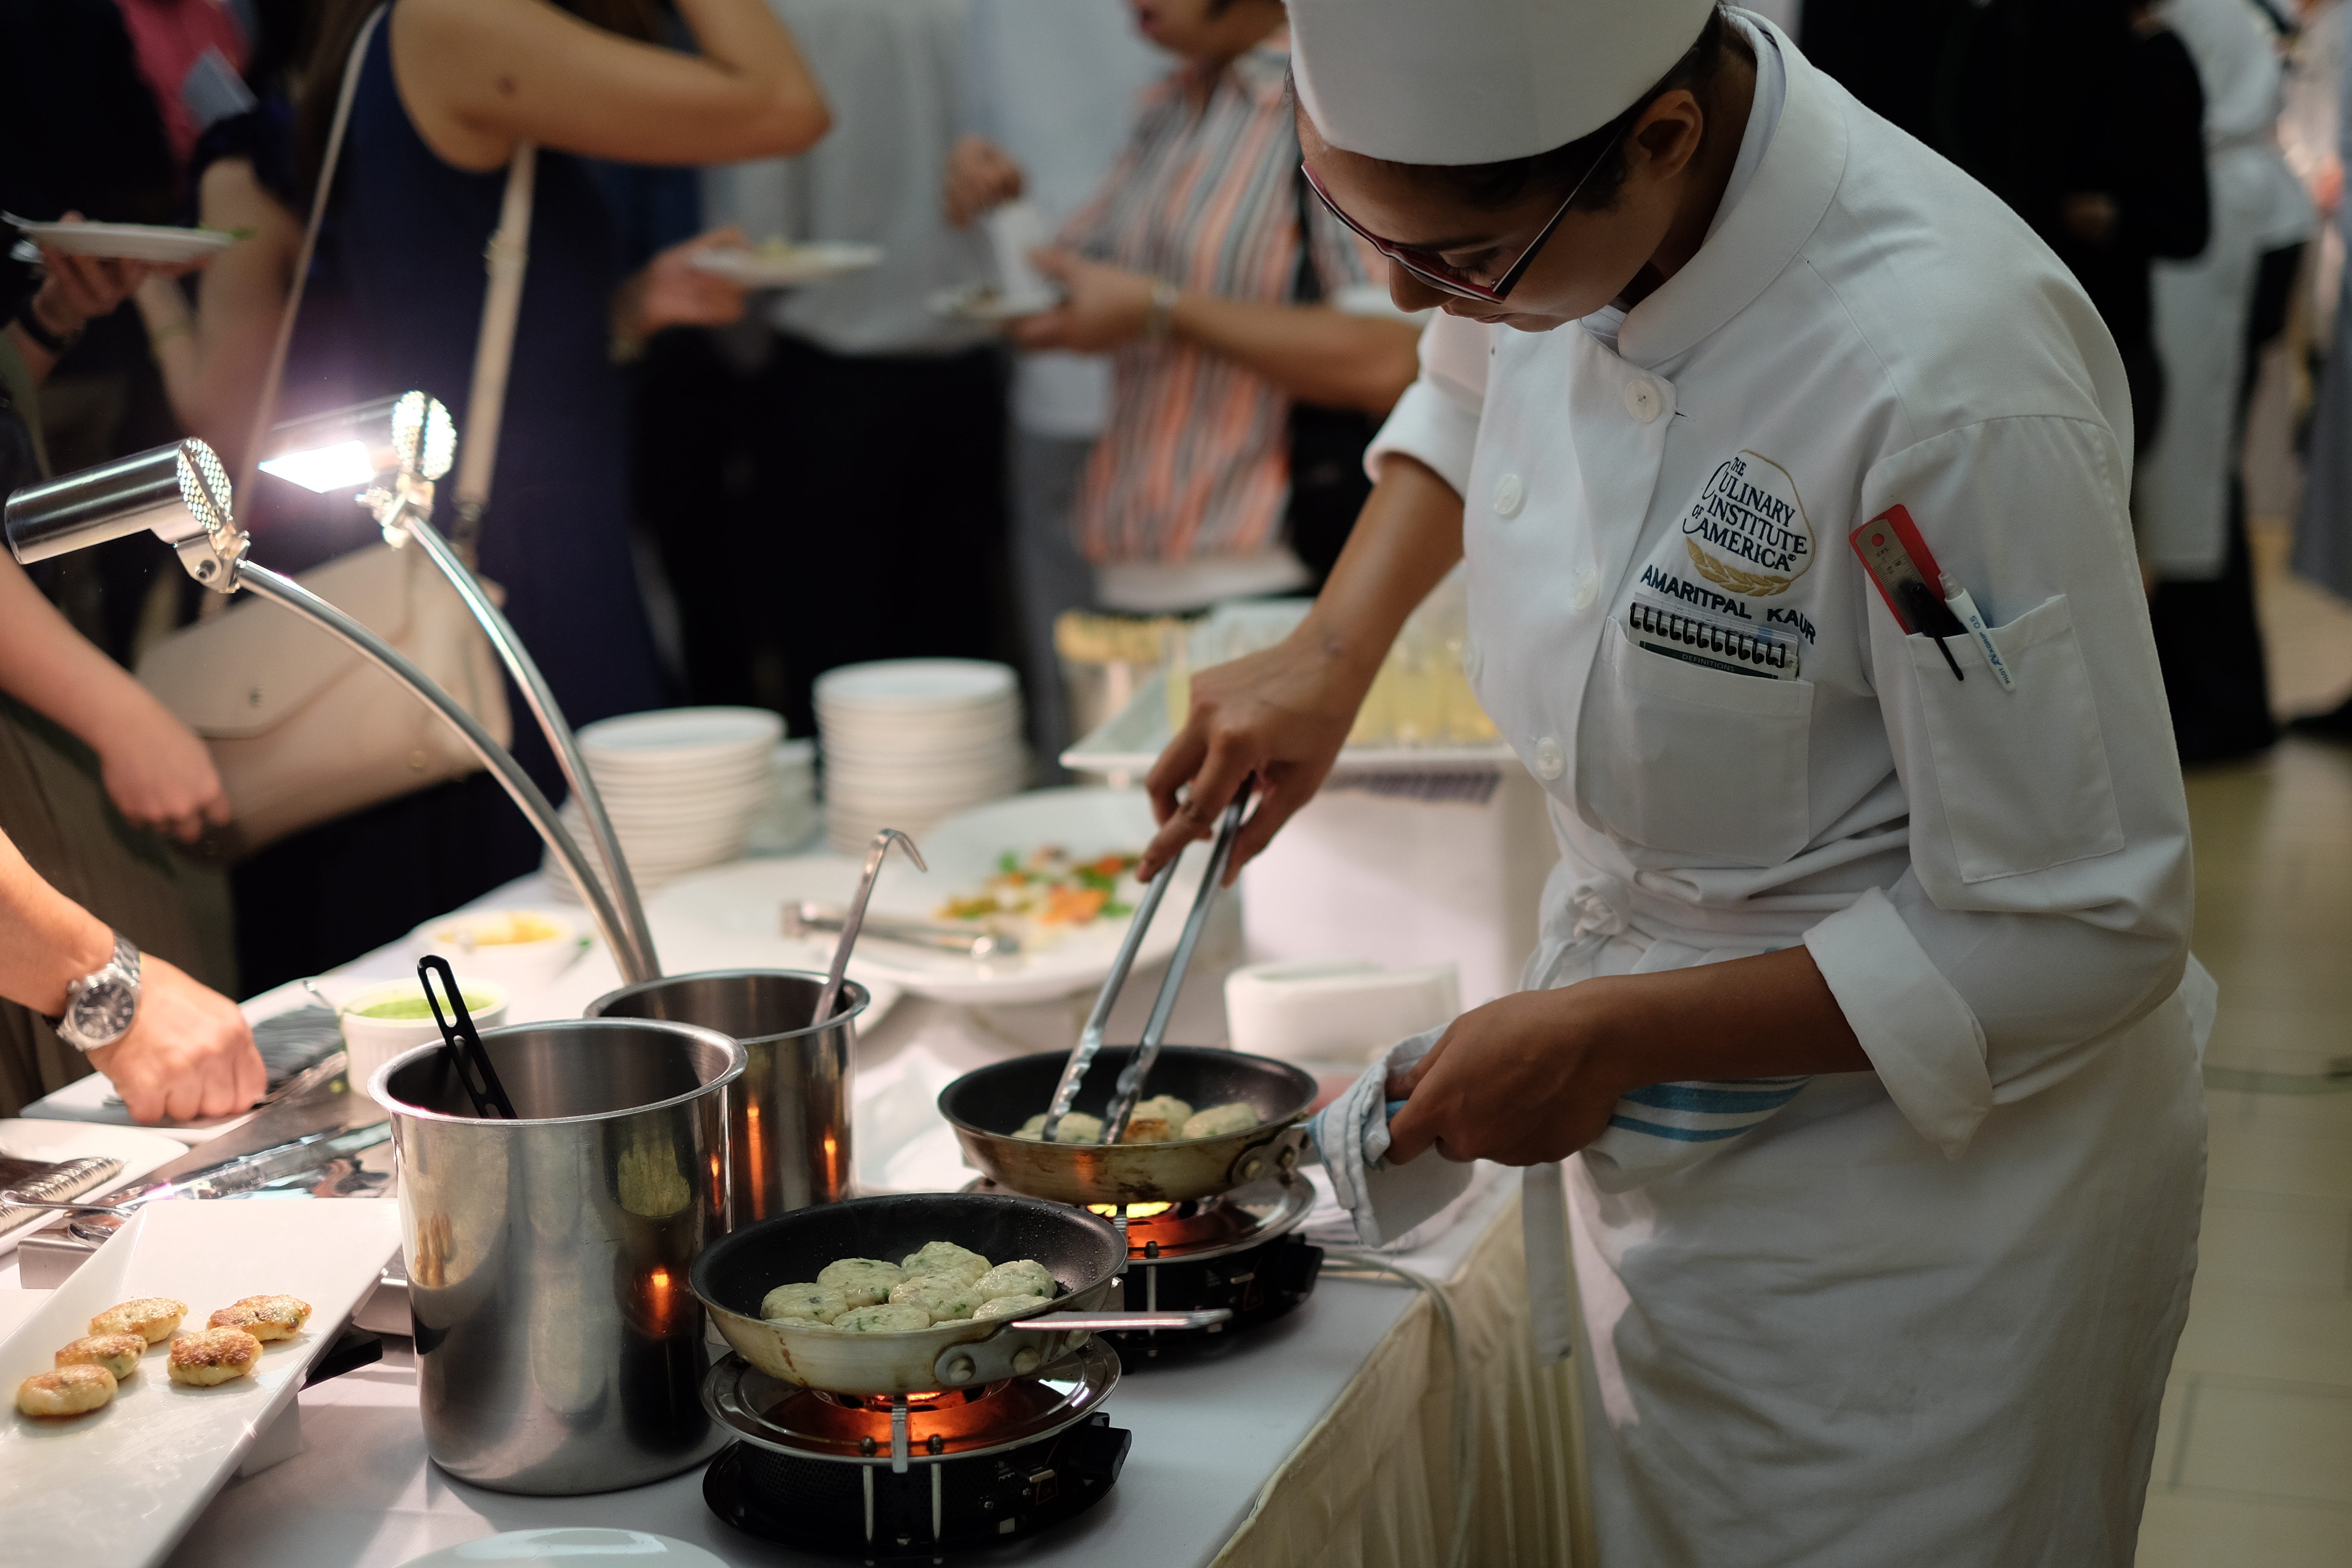 At the graduation banquet, junior culinarians prepare the food for guests and man the live stations.